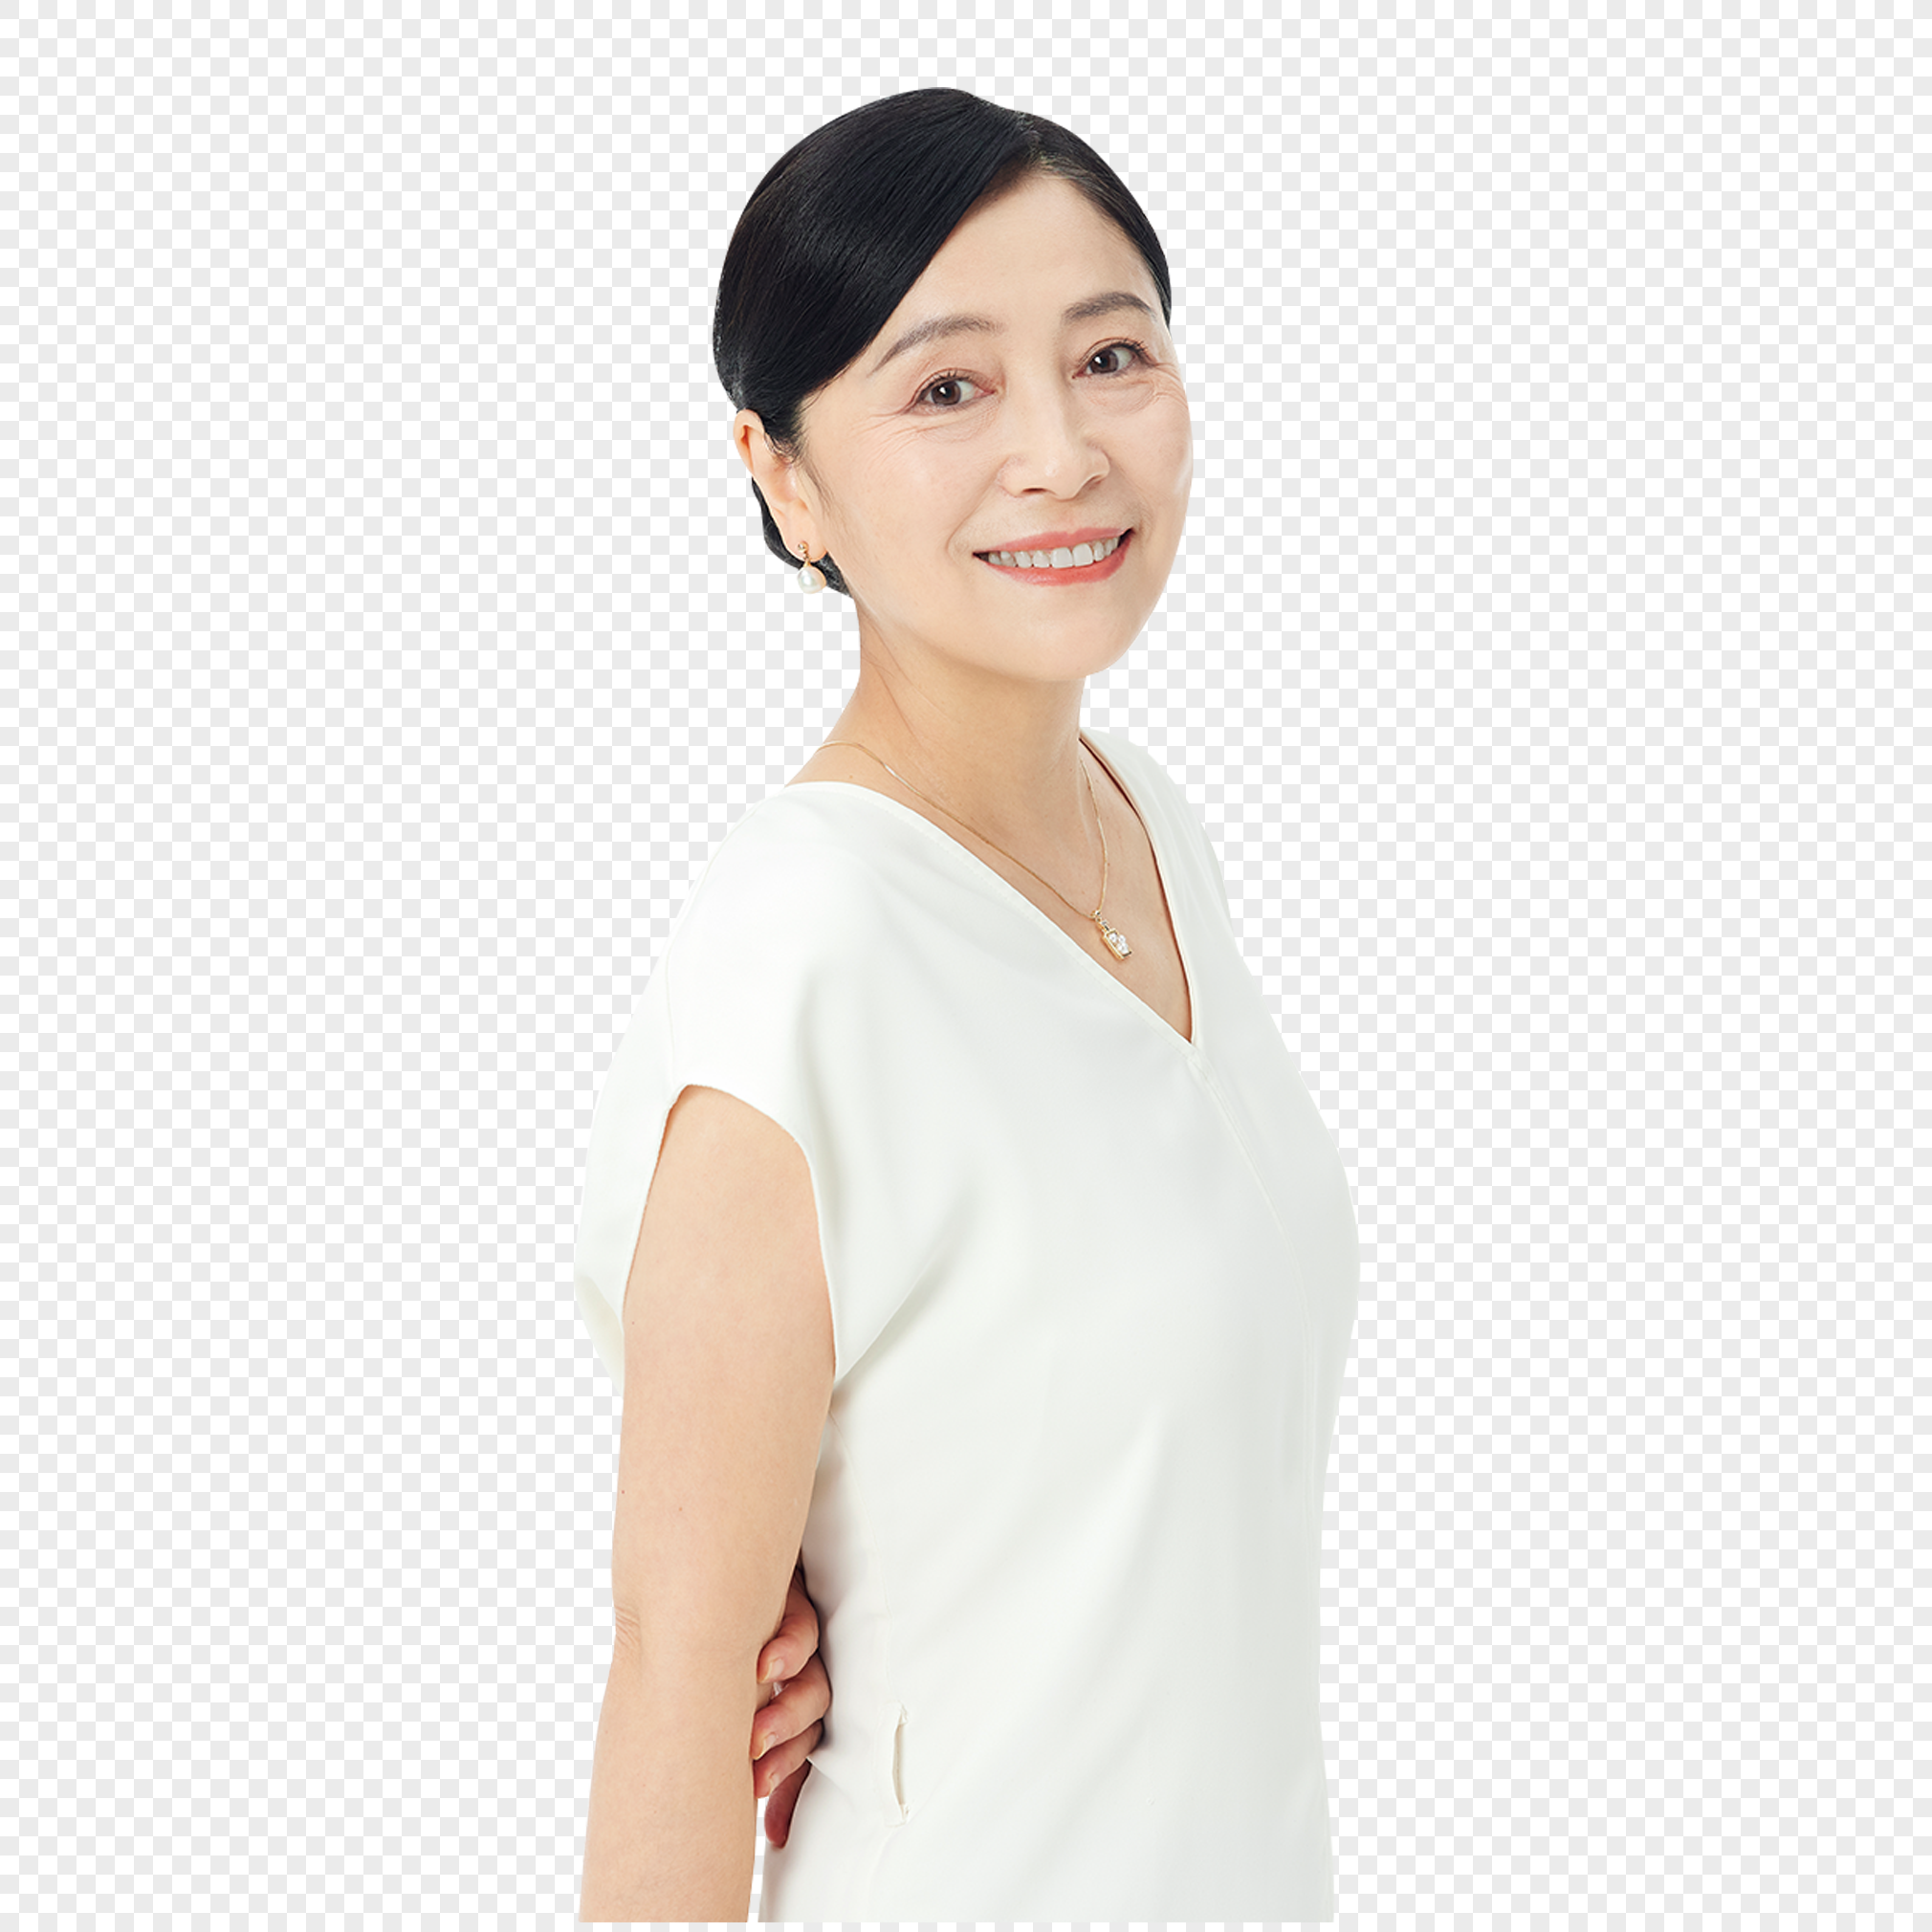 Middle Aged Woman PNG Images With Transparent Background